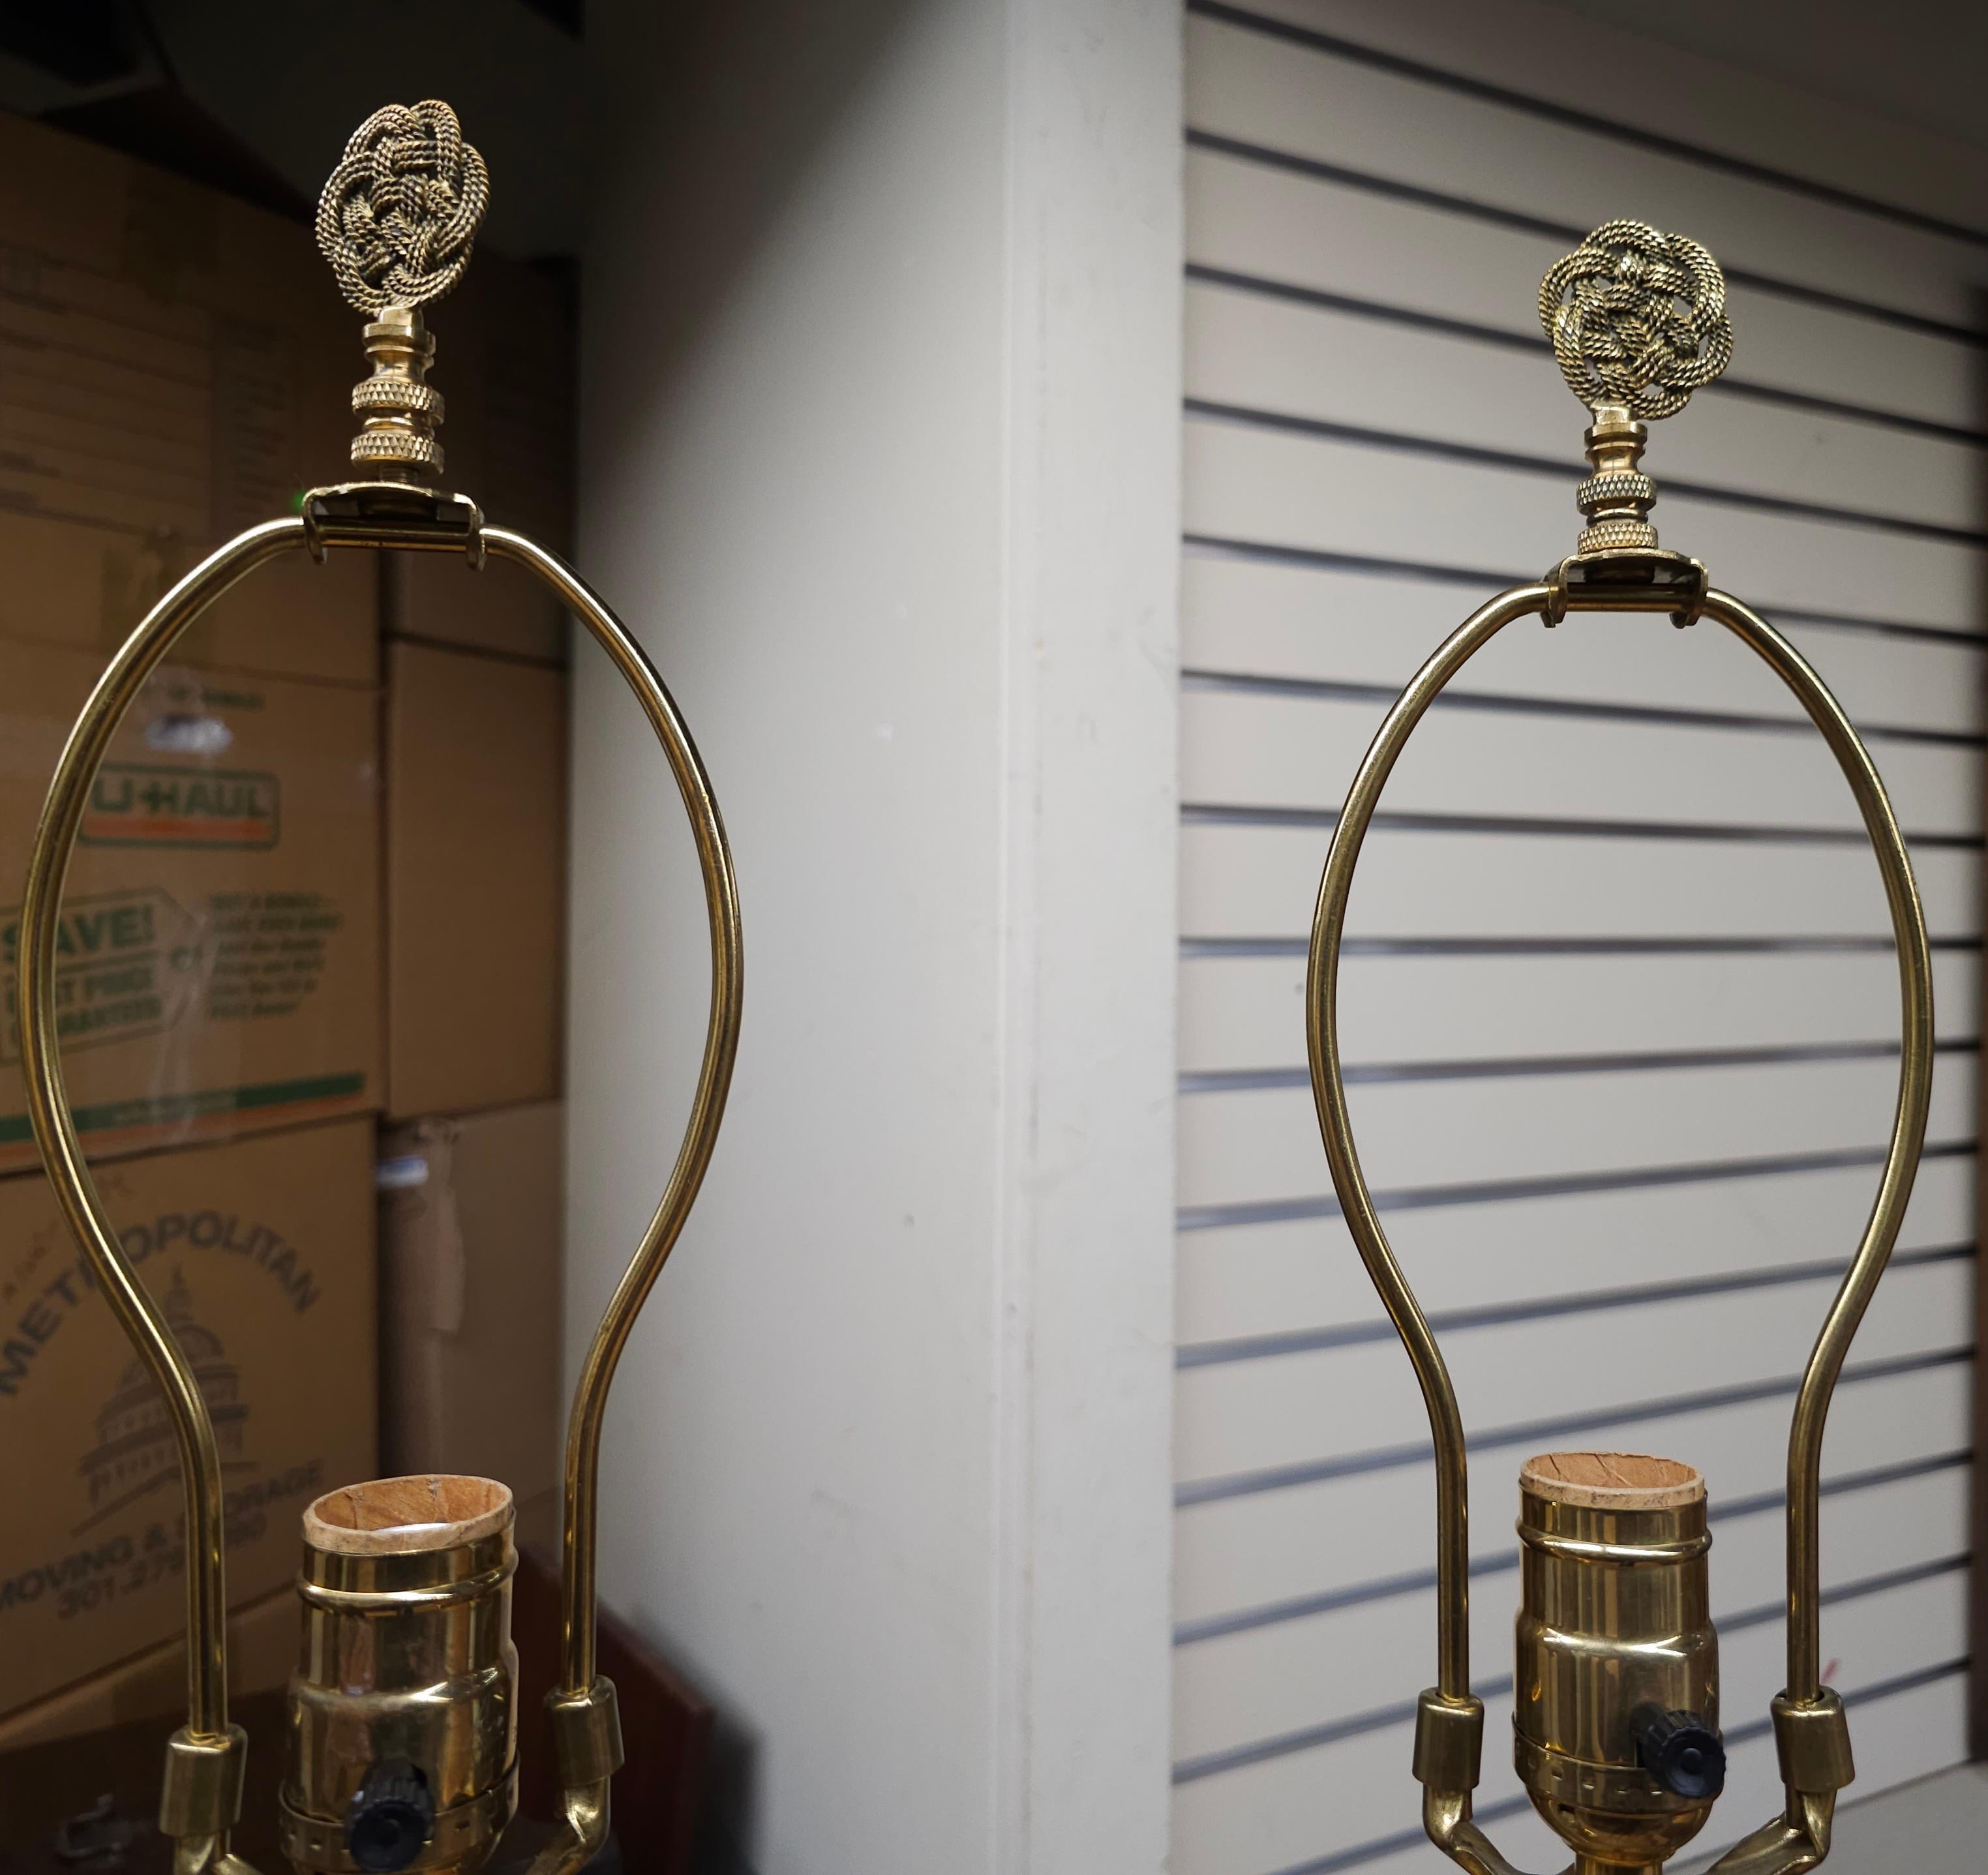 Virginia MetalCrafters Neoclassical Solid Polished Brass CandleStick Table Lamps In Good Condition For Sale In Germantown, MD